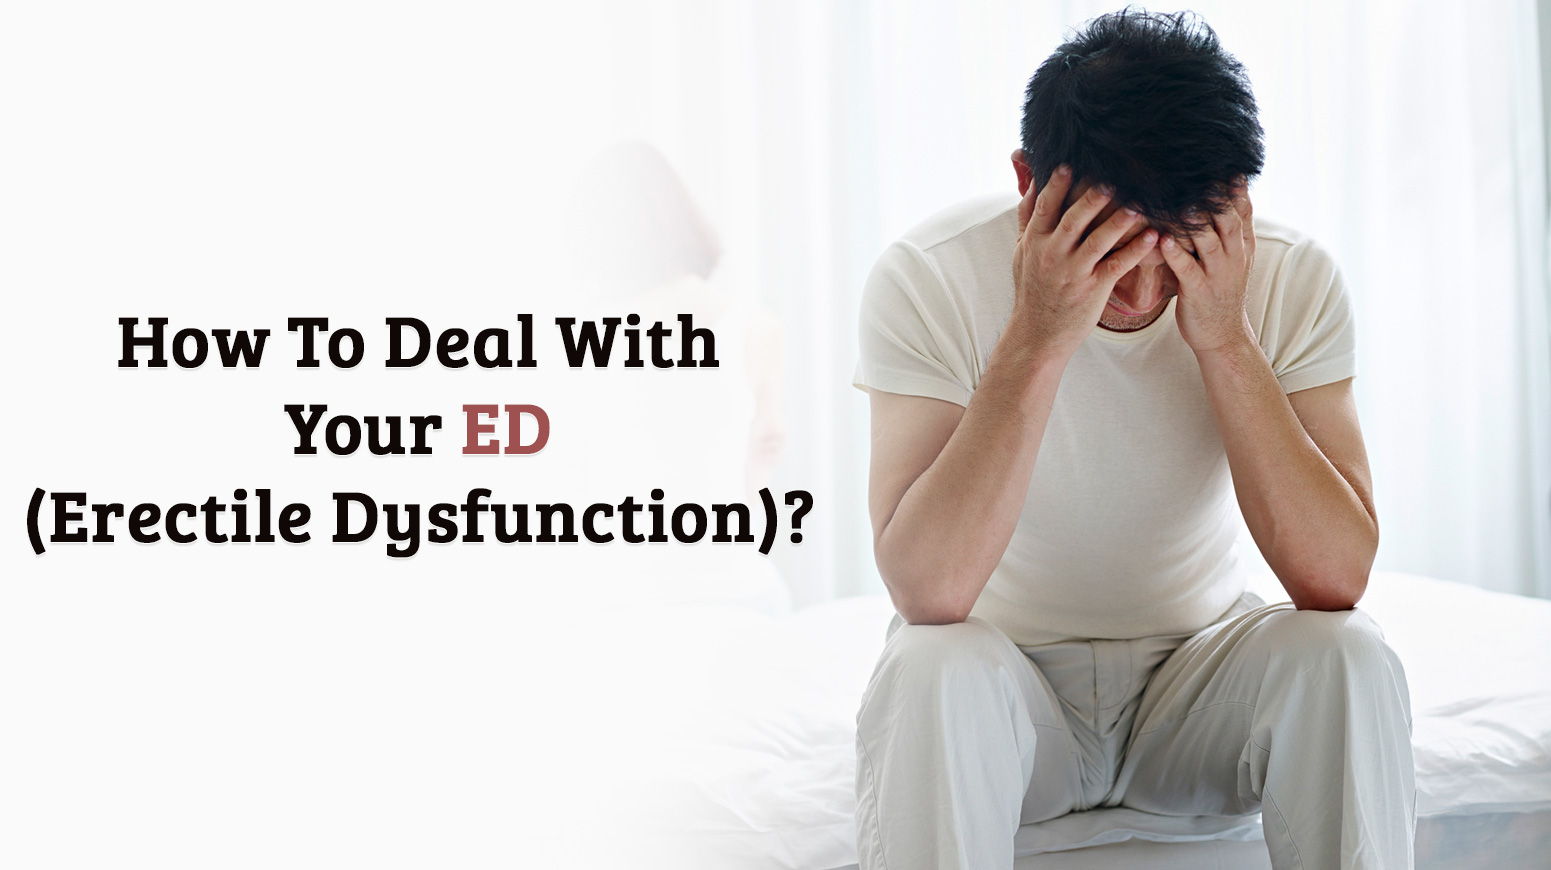 How to Deal With Your Erectile Dysfunction?